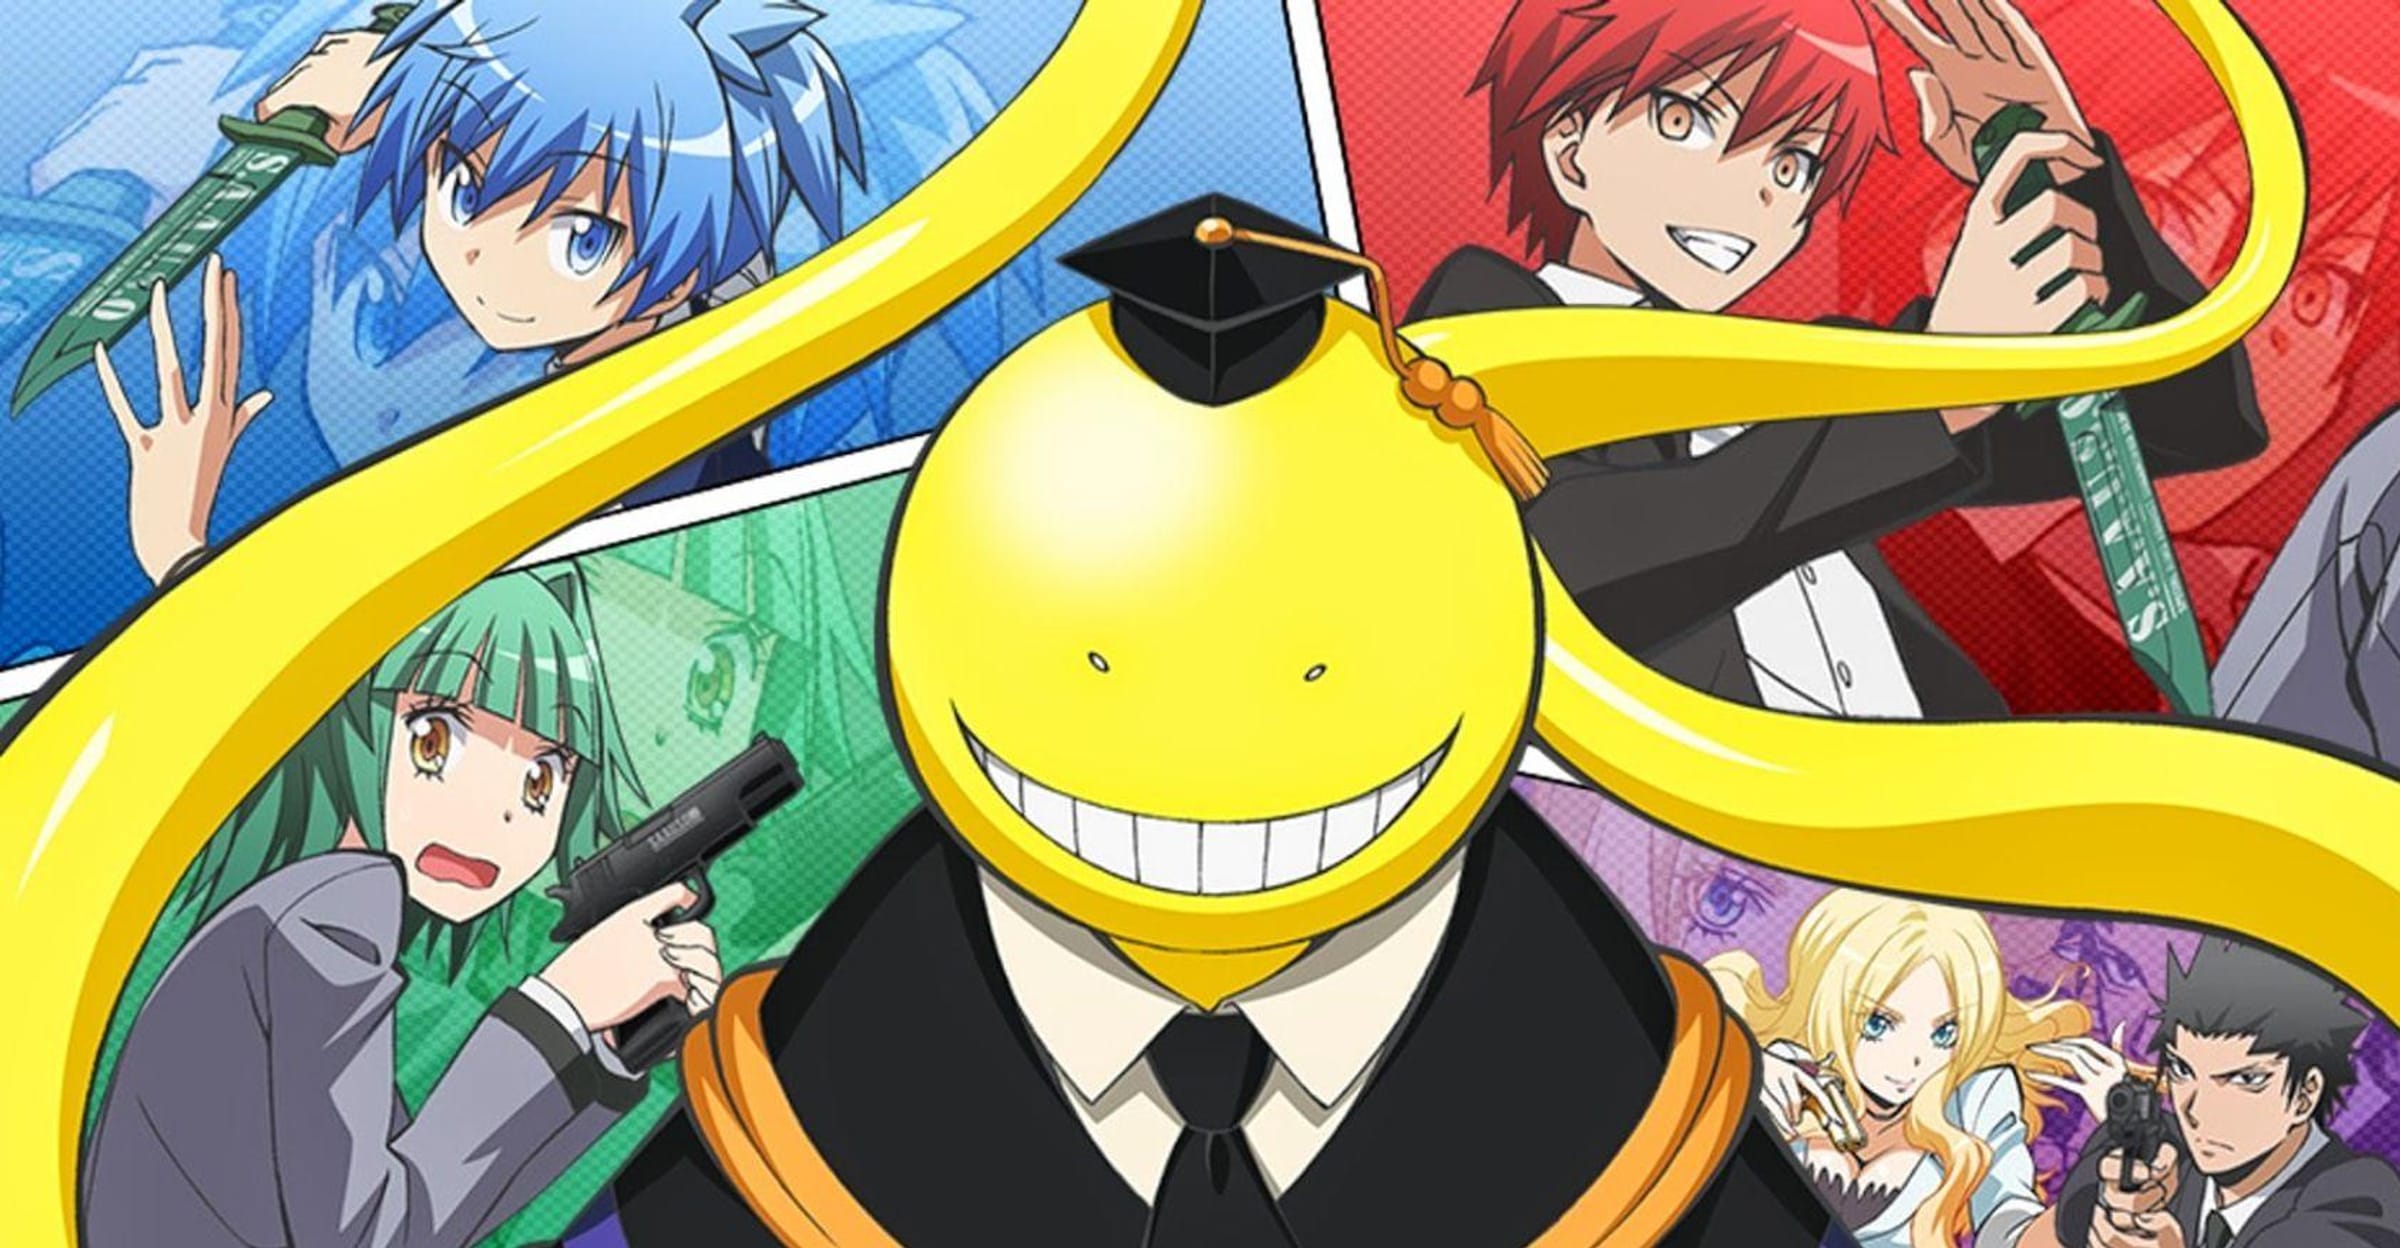 Assassination Classroom: A Kill or be Killed Anime You Need to Watch